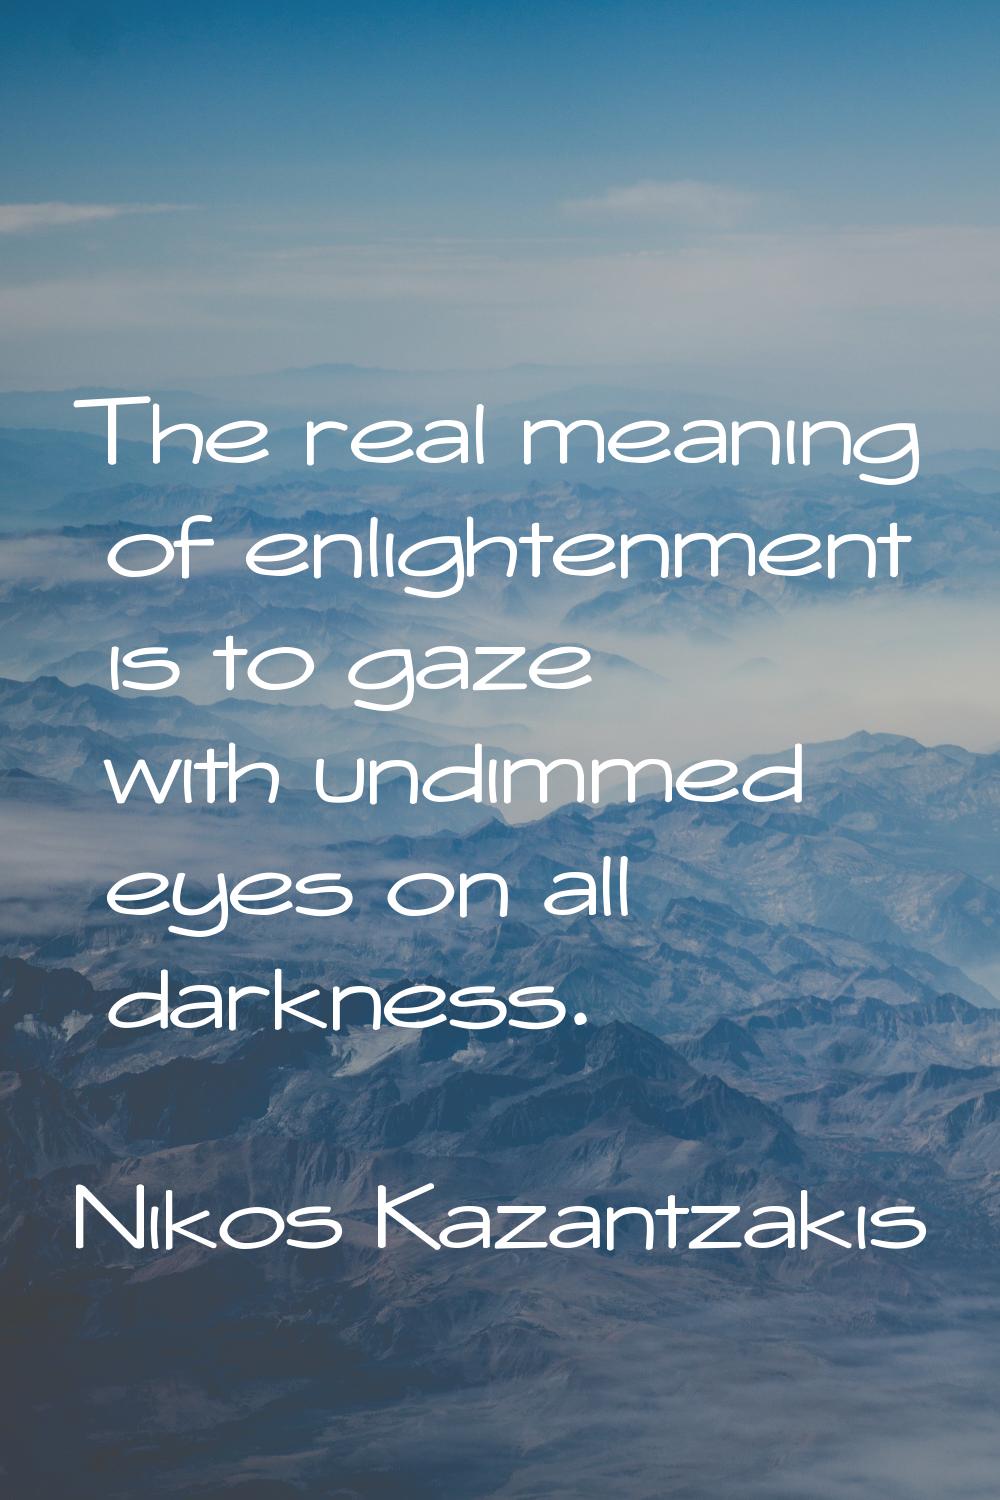 The real meaning of enlightenment is to gaze with undimmed eyes on all darkness.